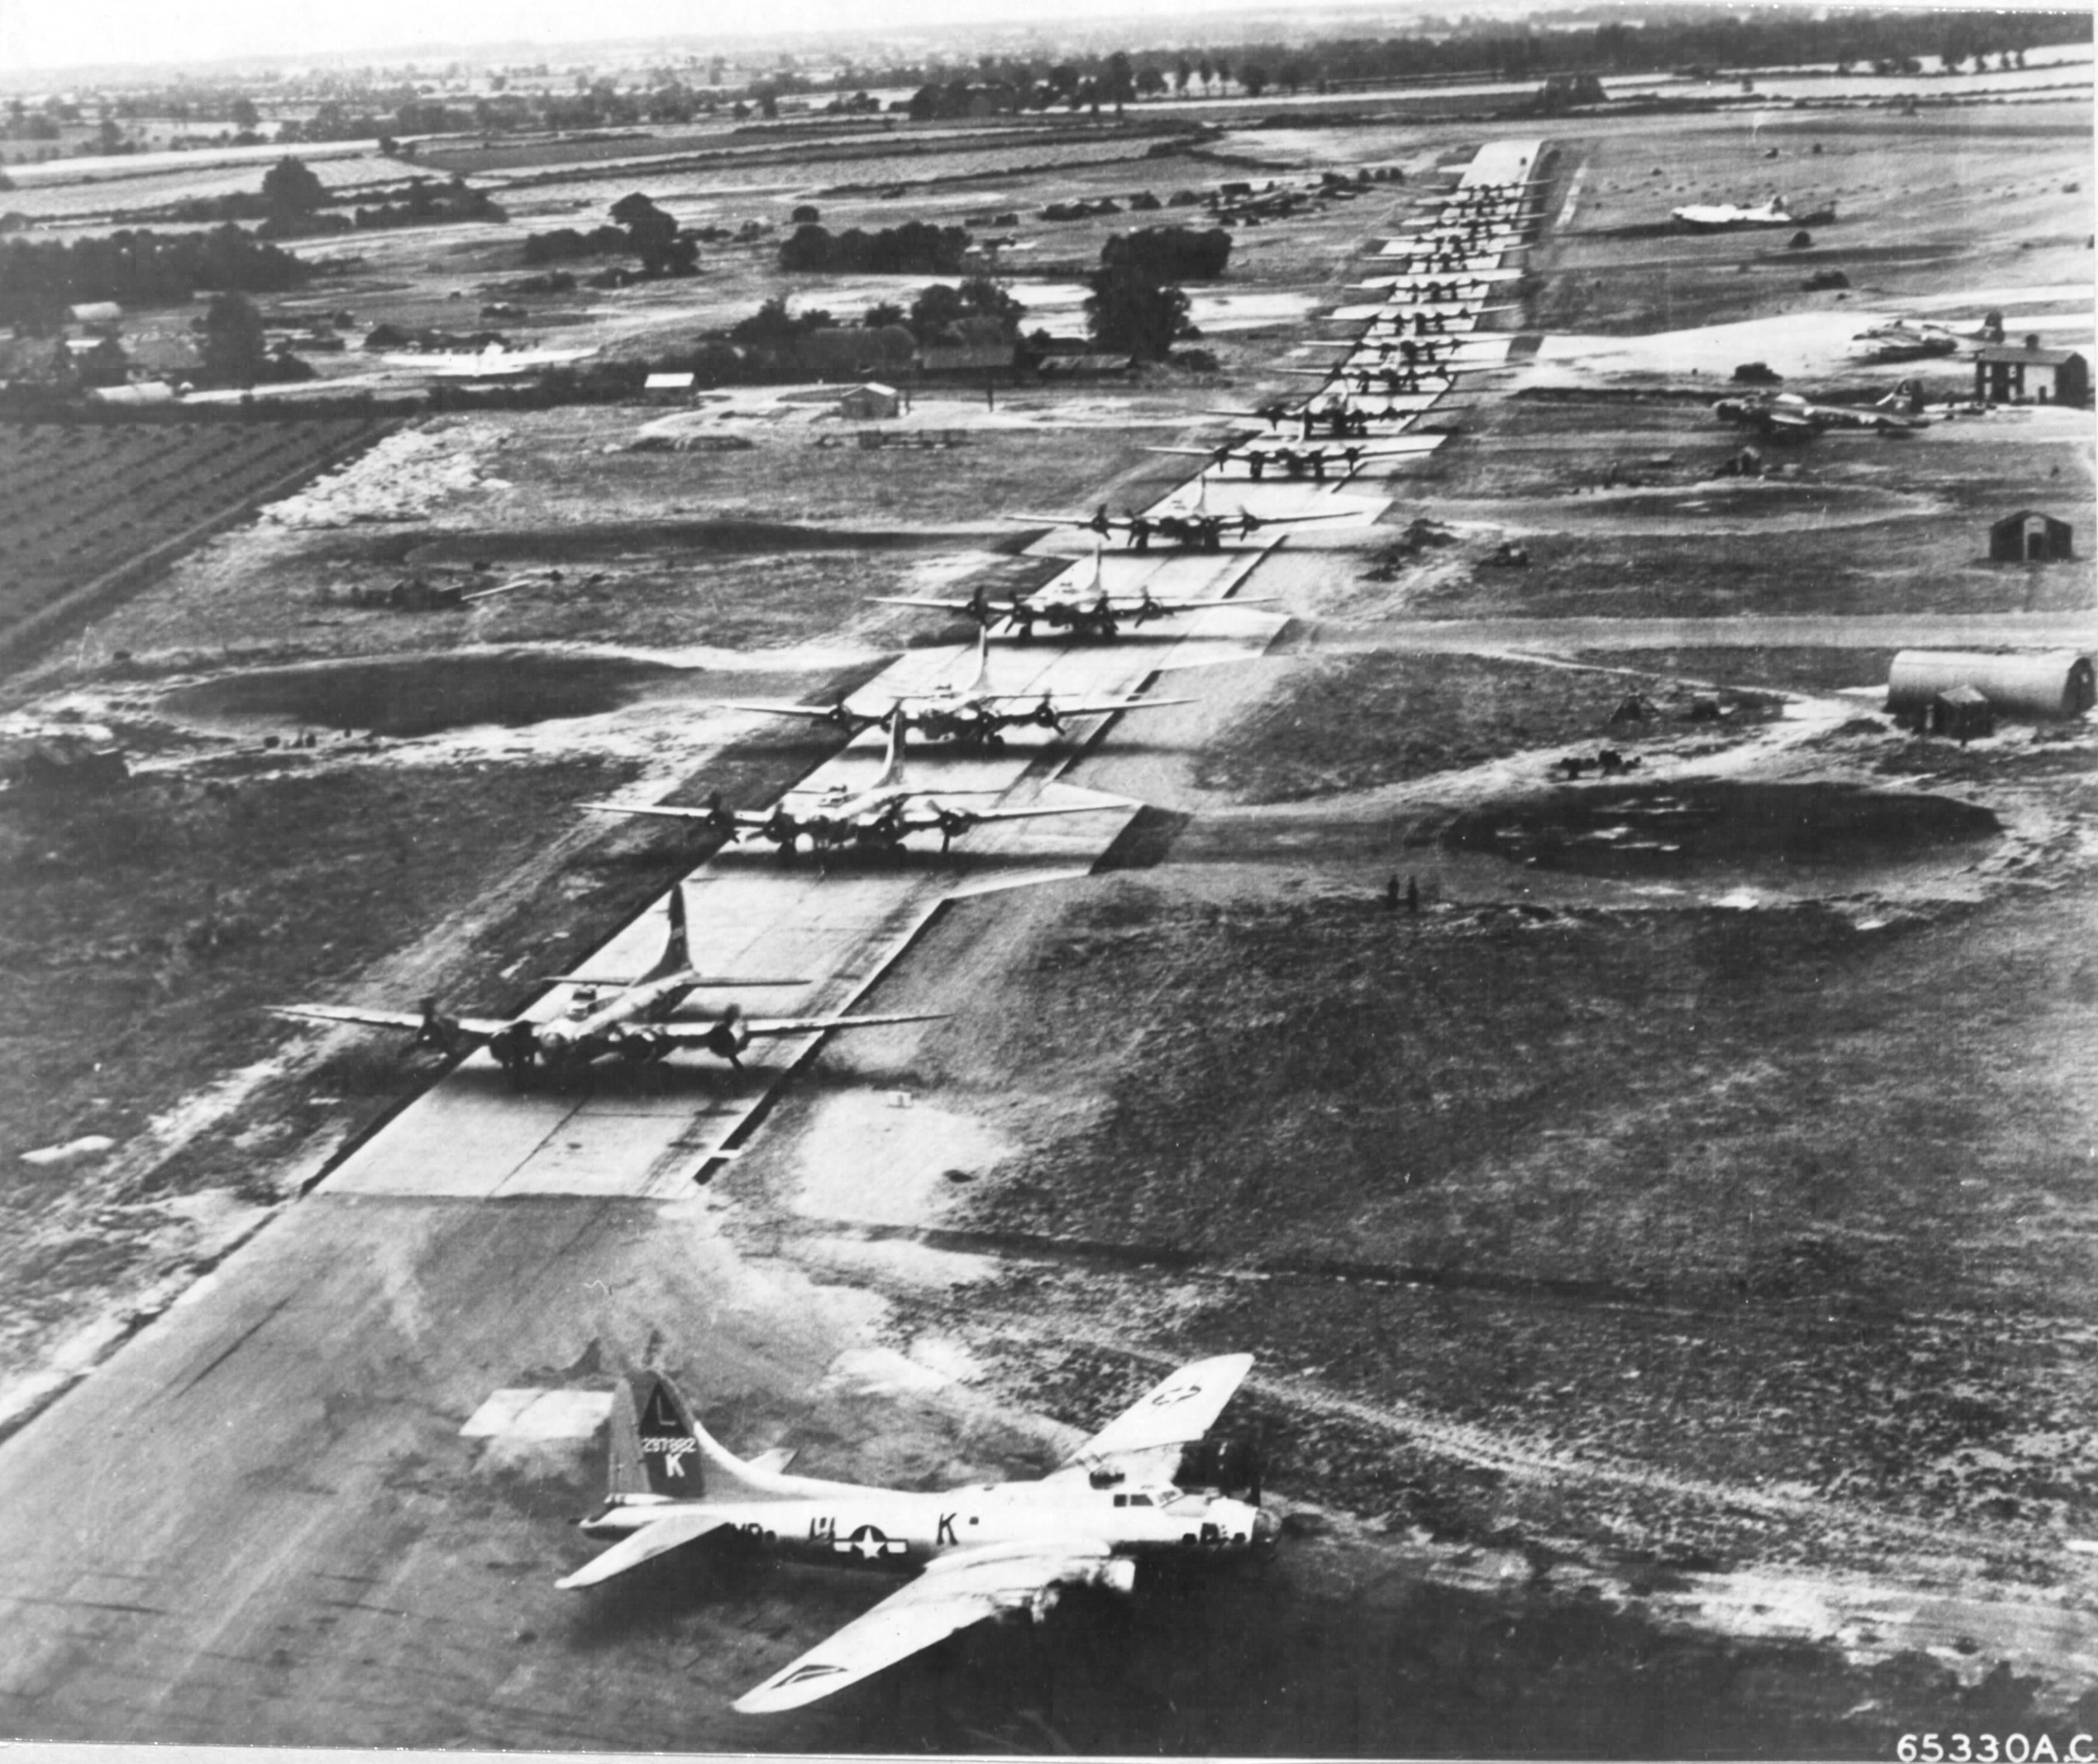 17 B-17 Fortresses from the 533rd Bomb Squadron line up for a mission at Ridgewell, Essex, England, UK, 1945